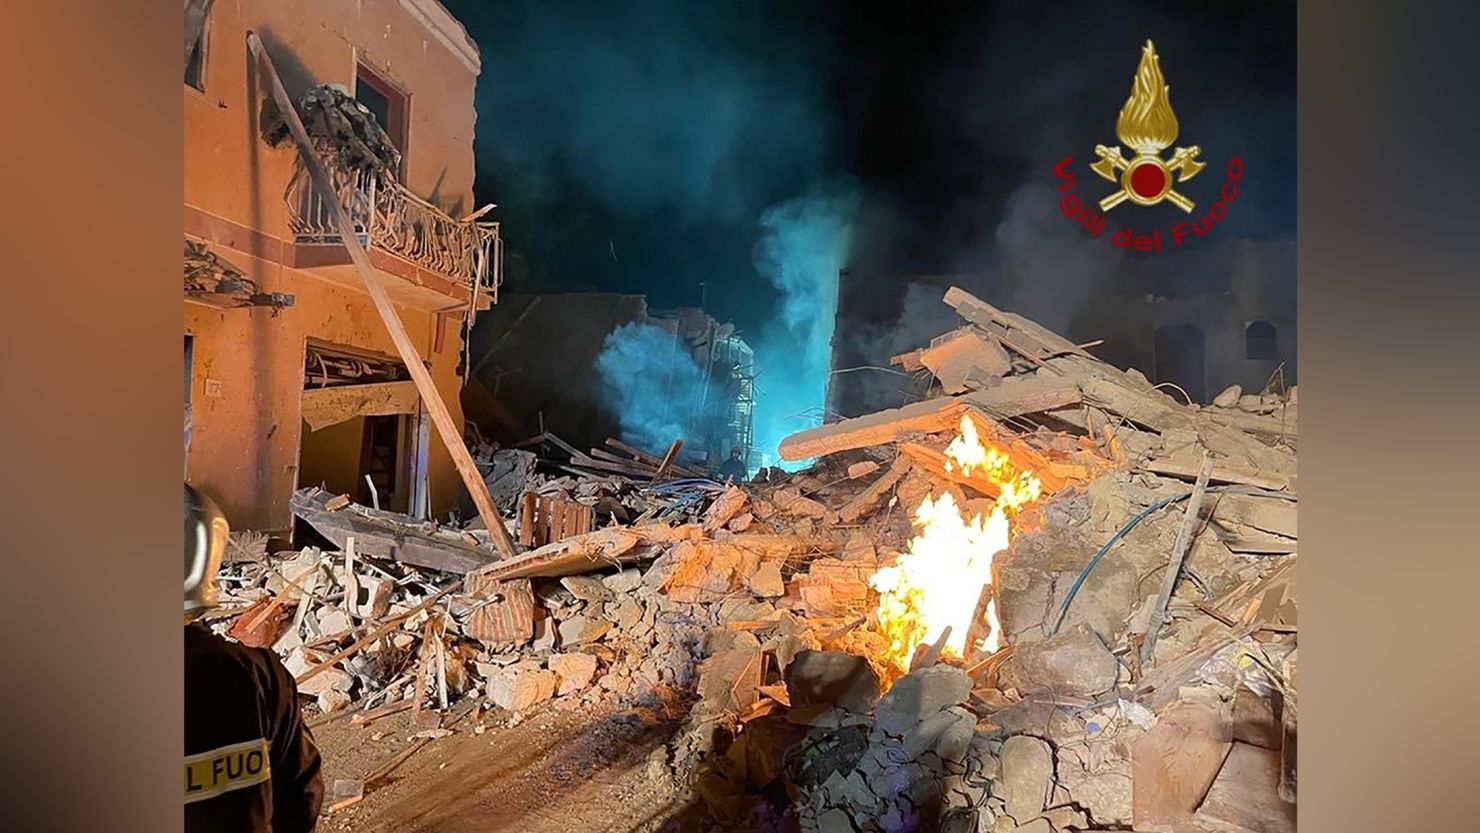 Rescue efforts are underway following the collapse of a building in Sicily, Italy.